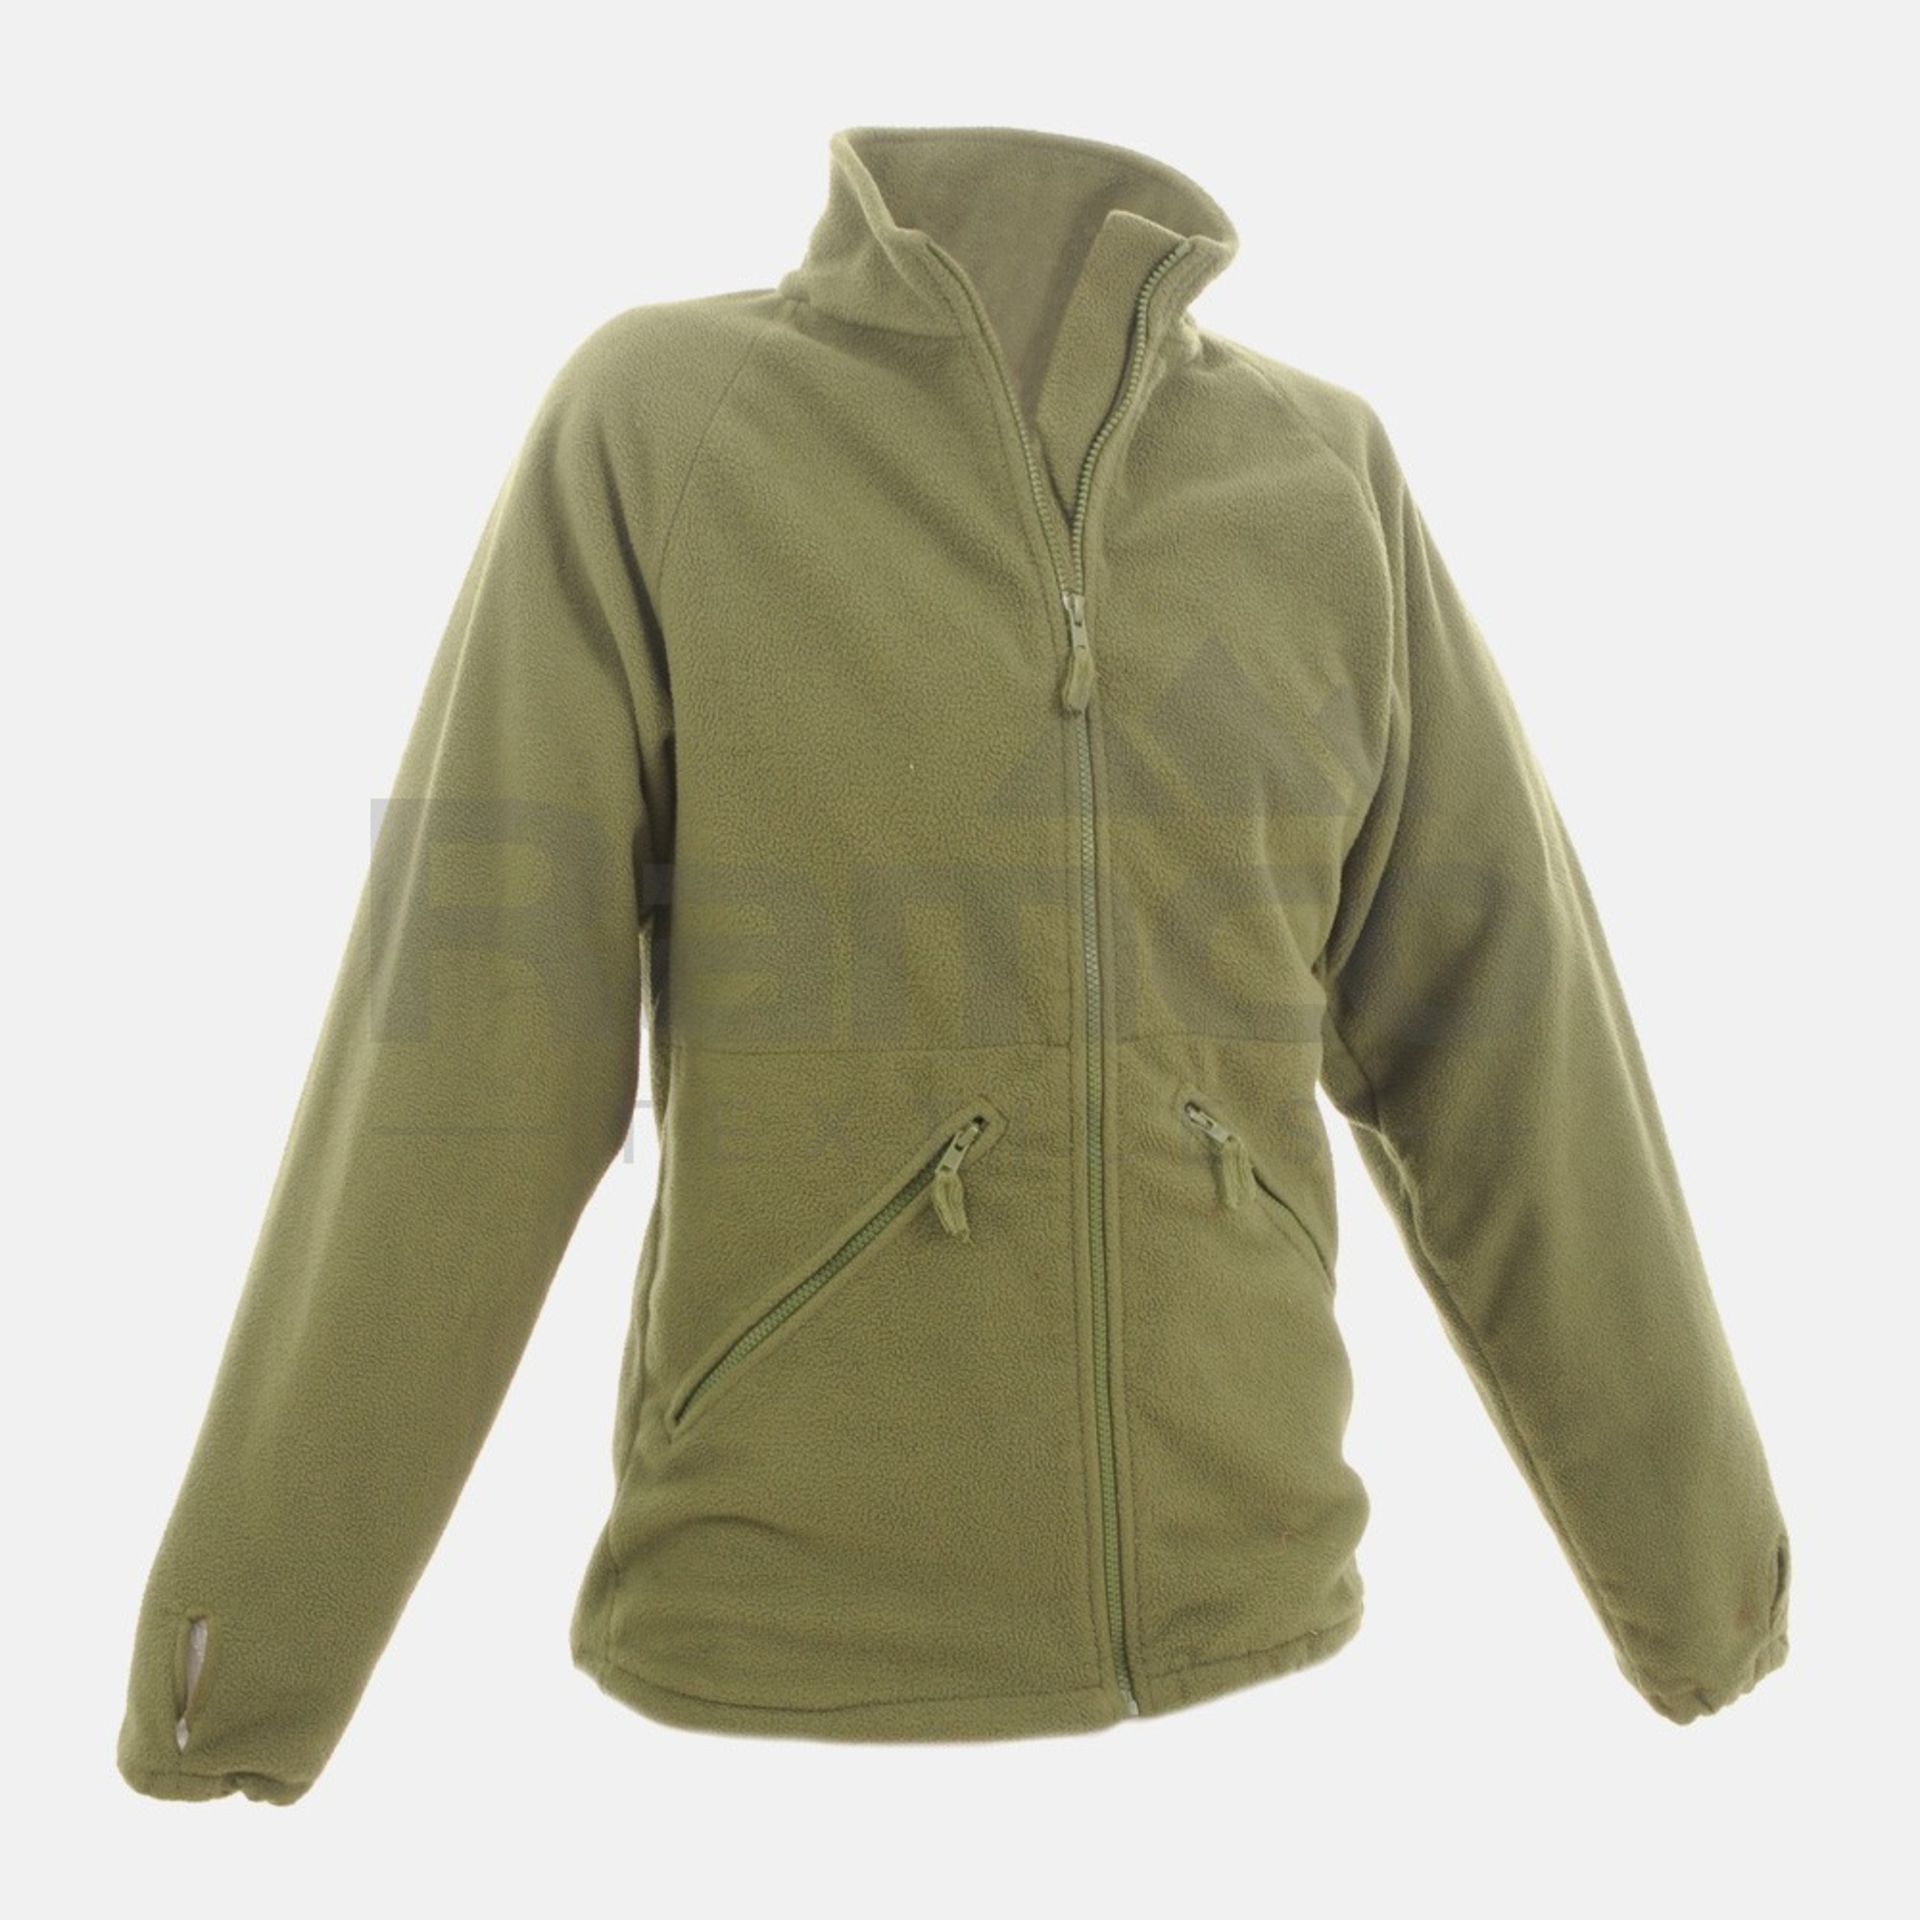 3x Thermal Olive Green Fleece with Collar & 1x British Army Green Fleece - Image 2 of 3